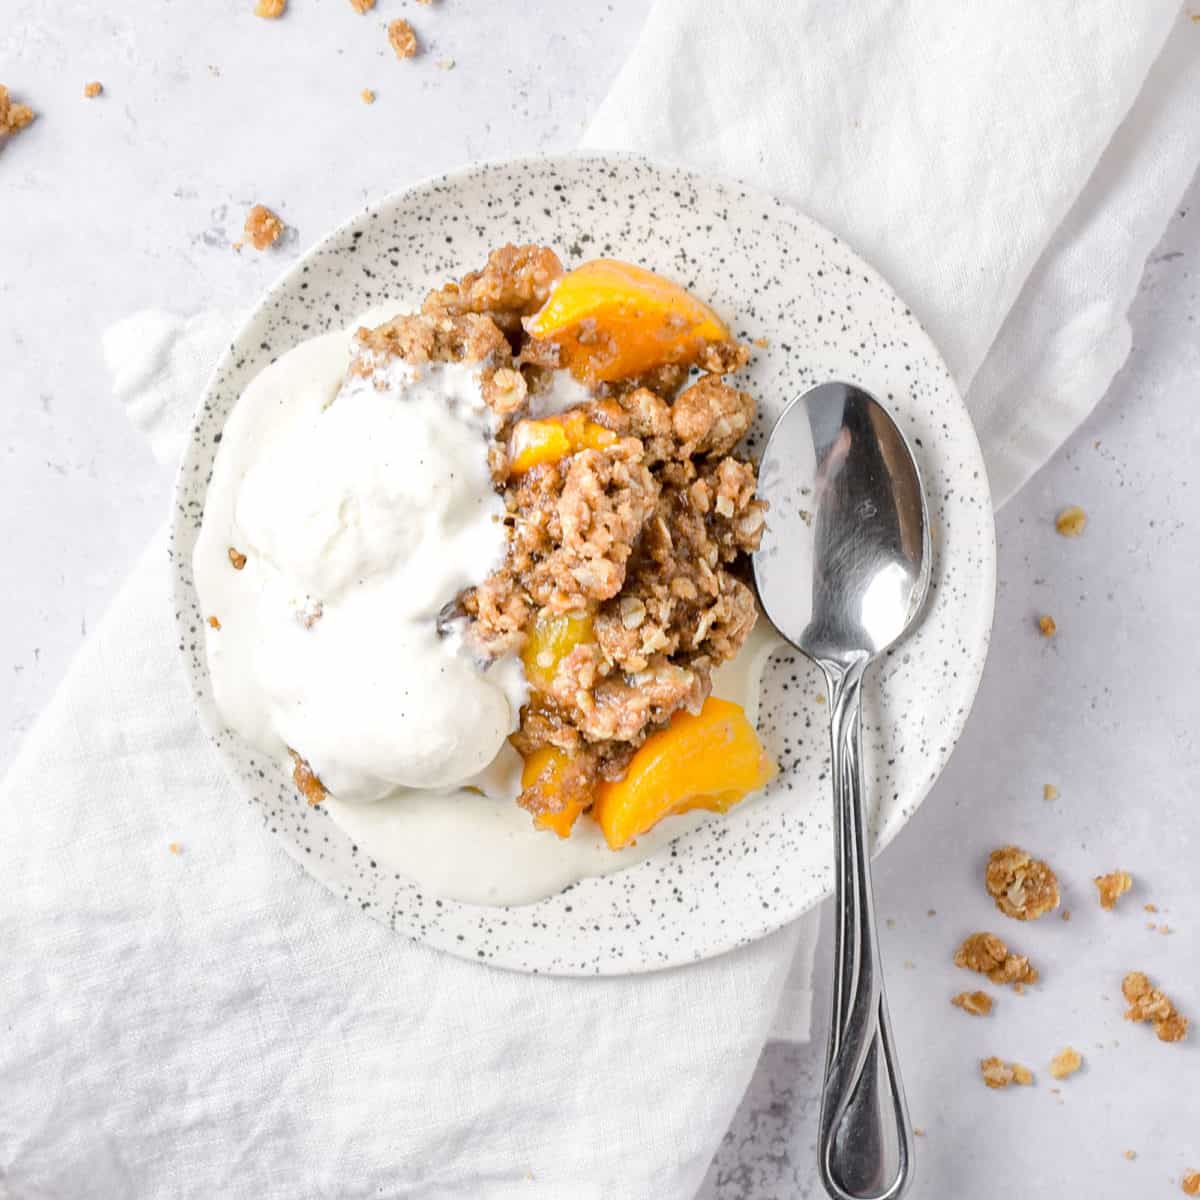 A close up of peach crisp with canned peaches.